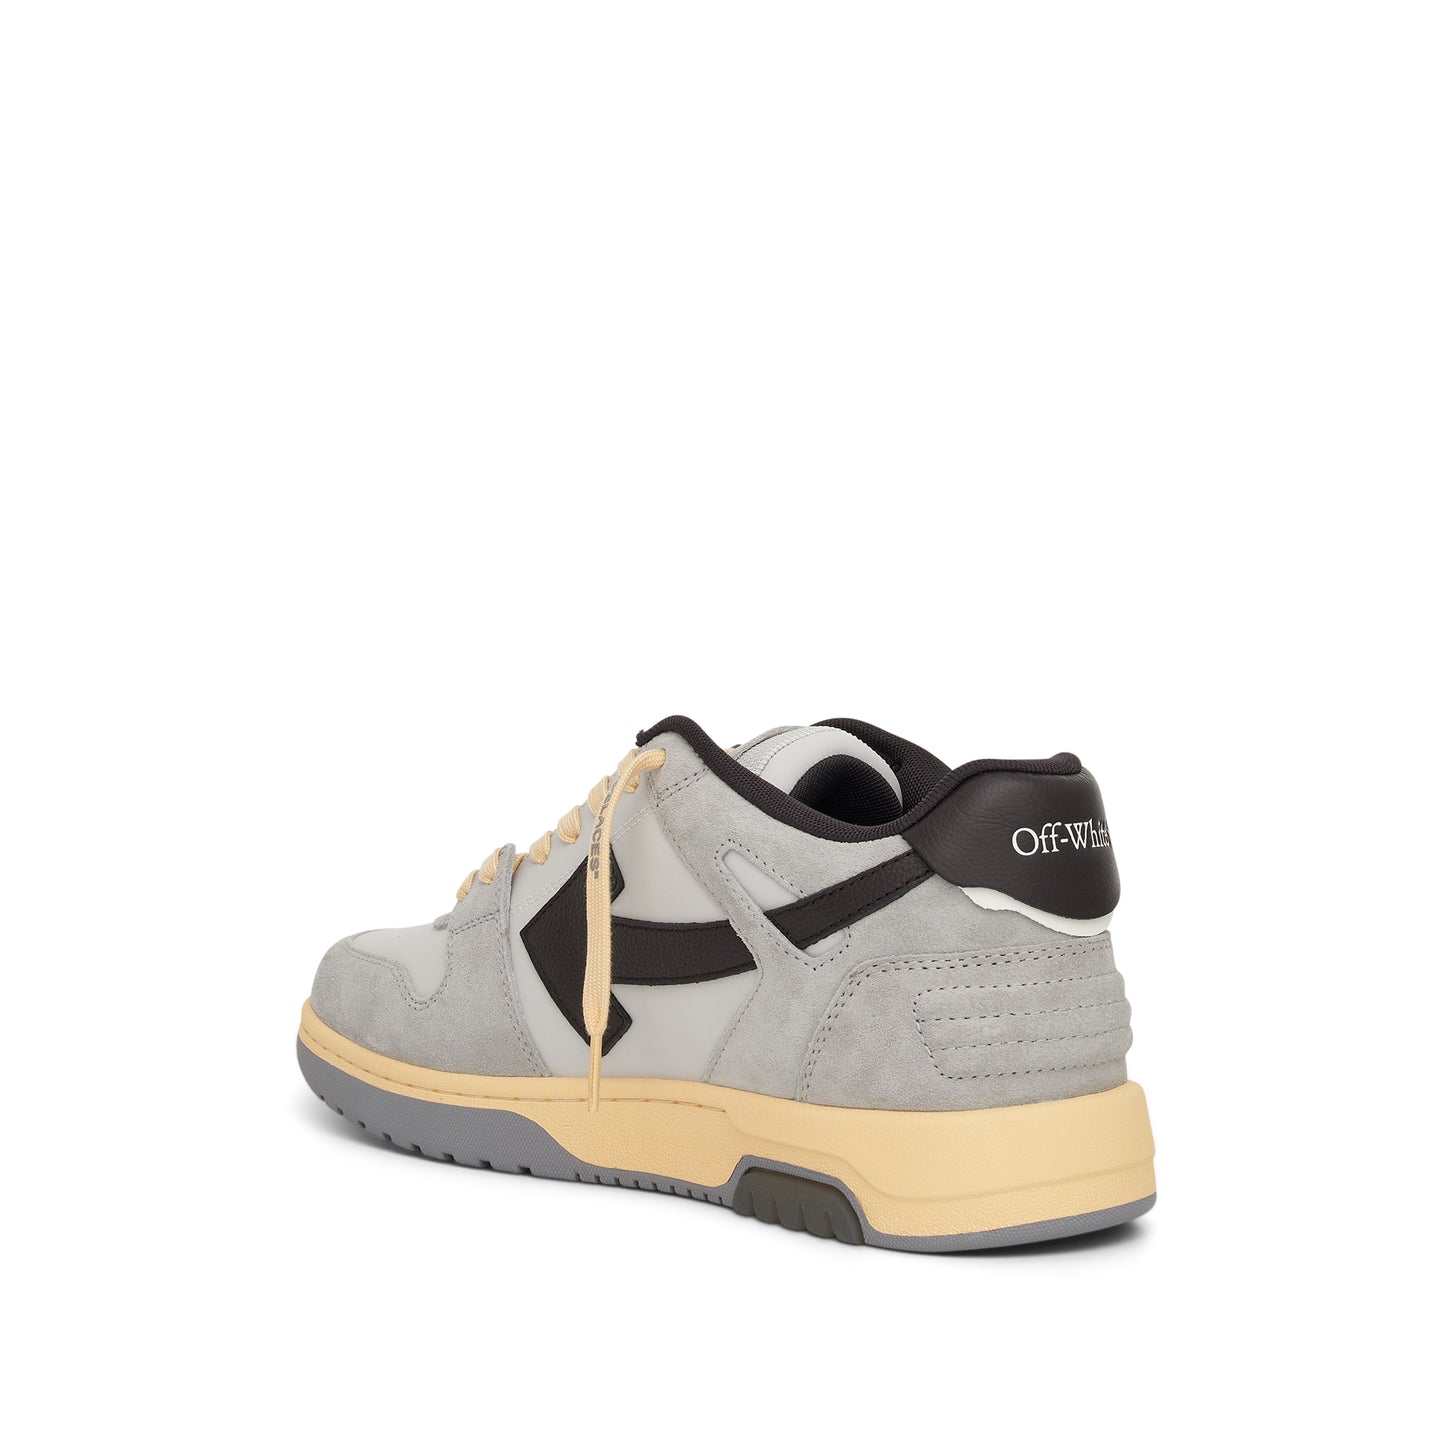 Out of Office Calf Leather Suede Sneaker in Light Grey